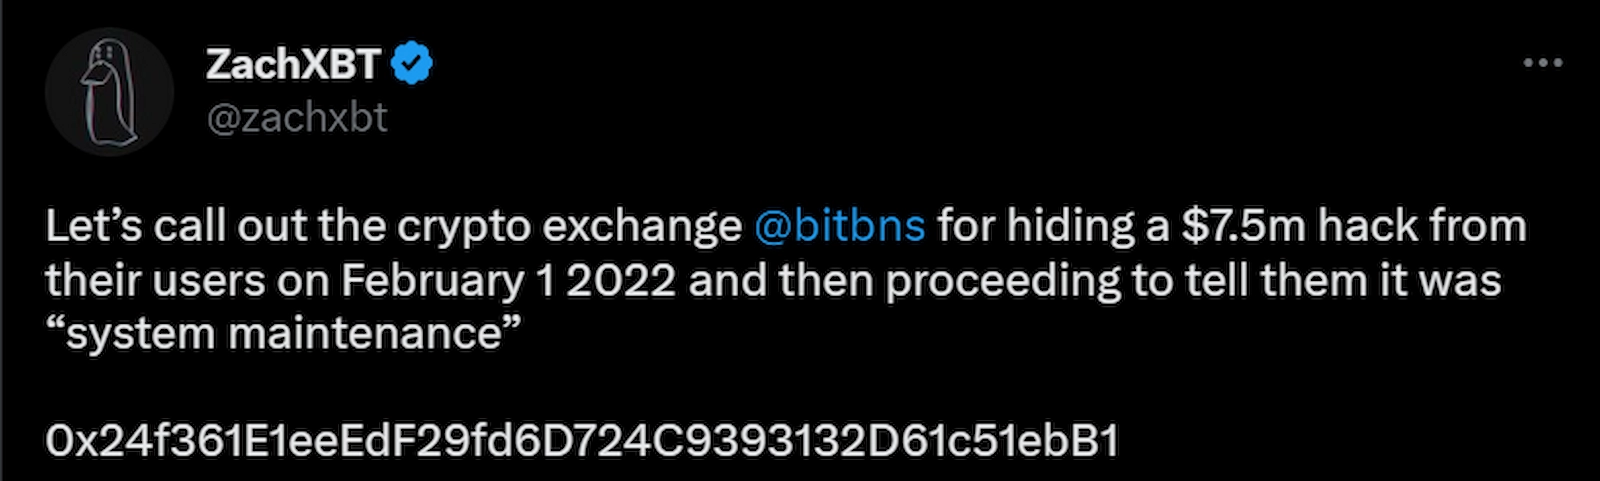 ZachXBT called out BitBNS exchange for hiding the hack